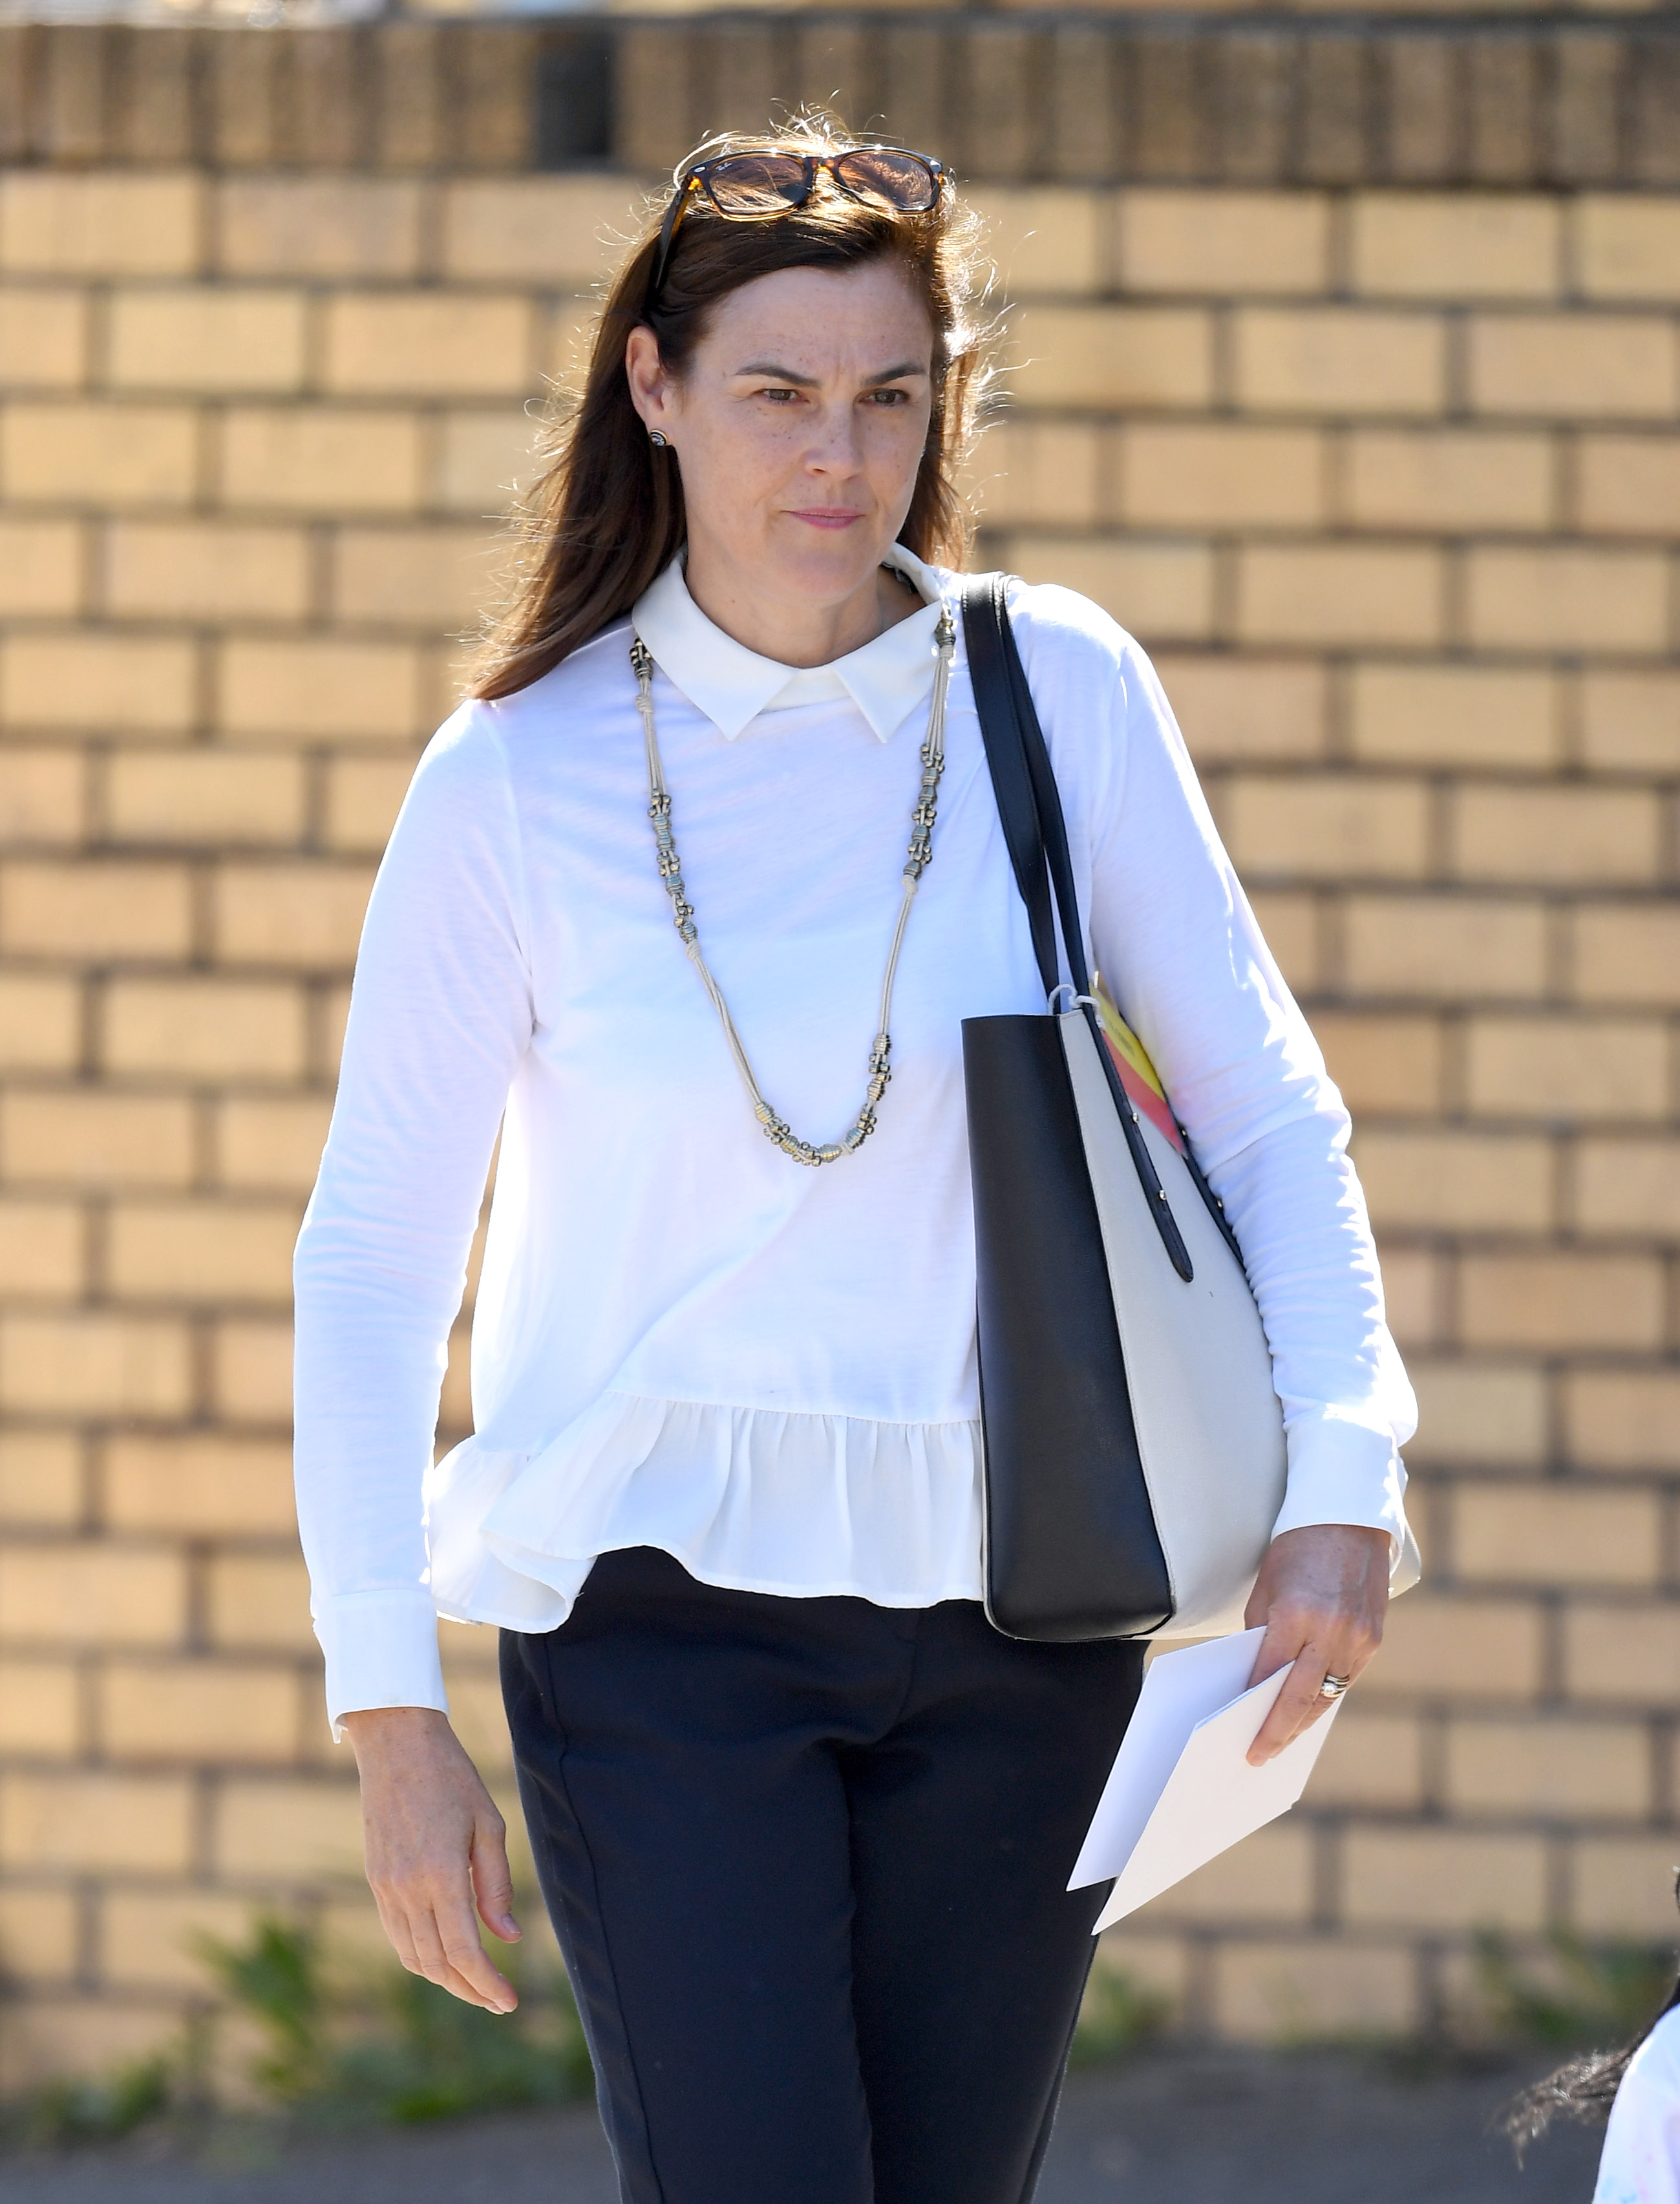 Samantha Cohen during a visit of the Nyanga Township on September 23, 2019 in Cape Town, South Africa | Source: Getty Images